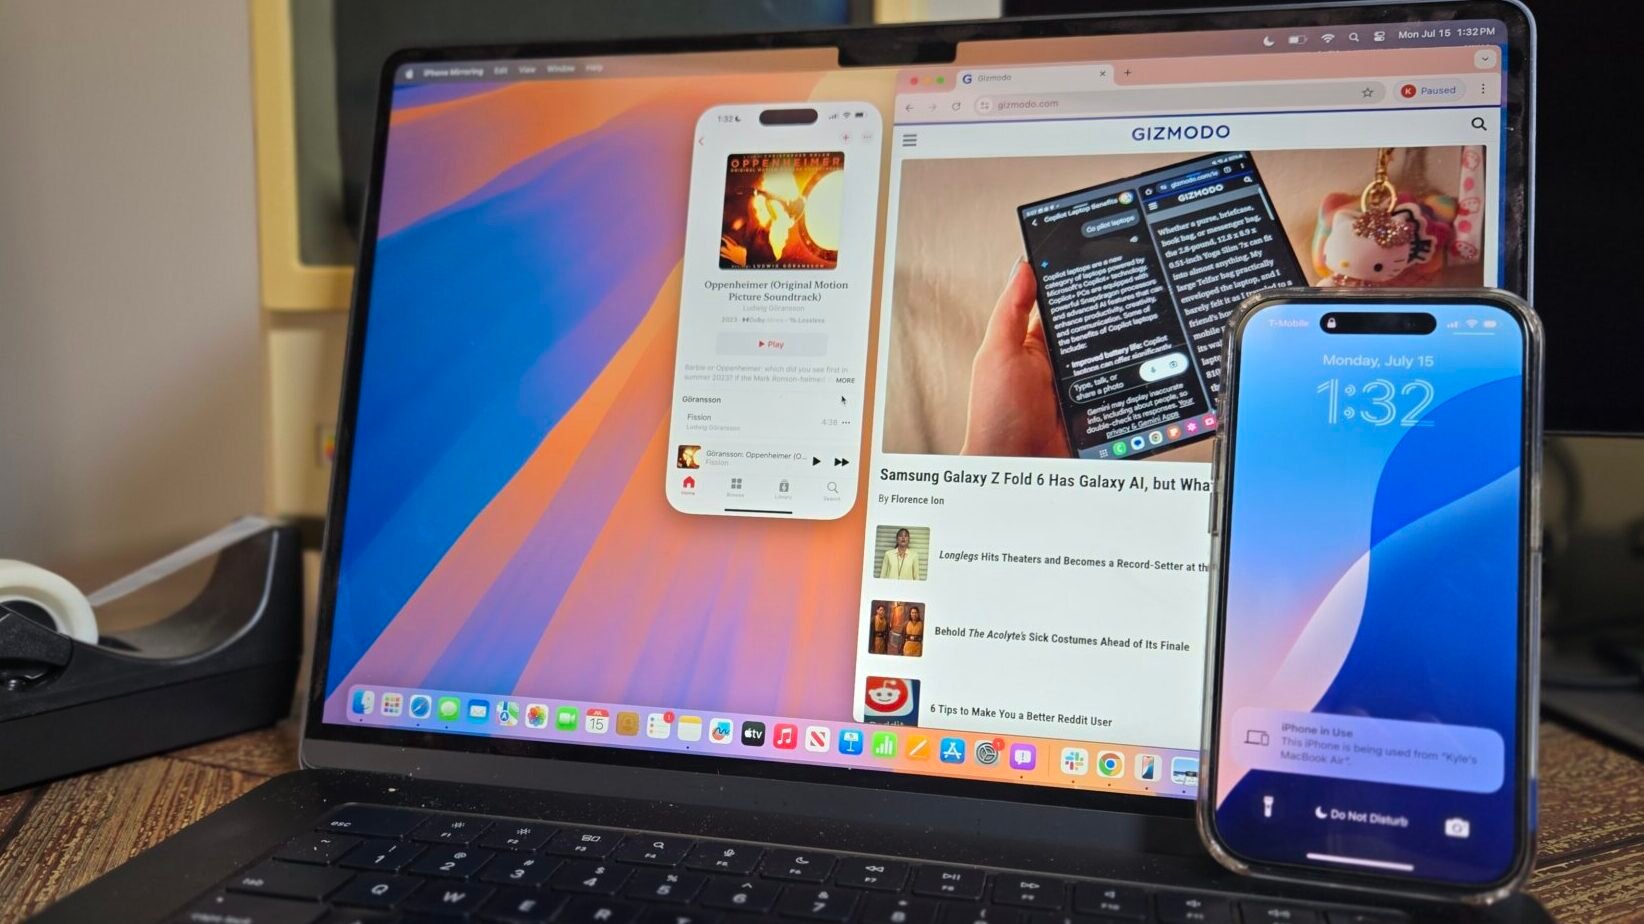 iPhone Mirroring on macOS Beta Brings Restricted Apps to Mac